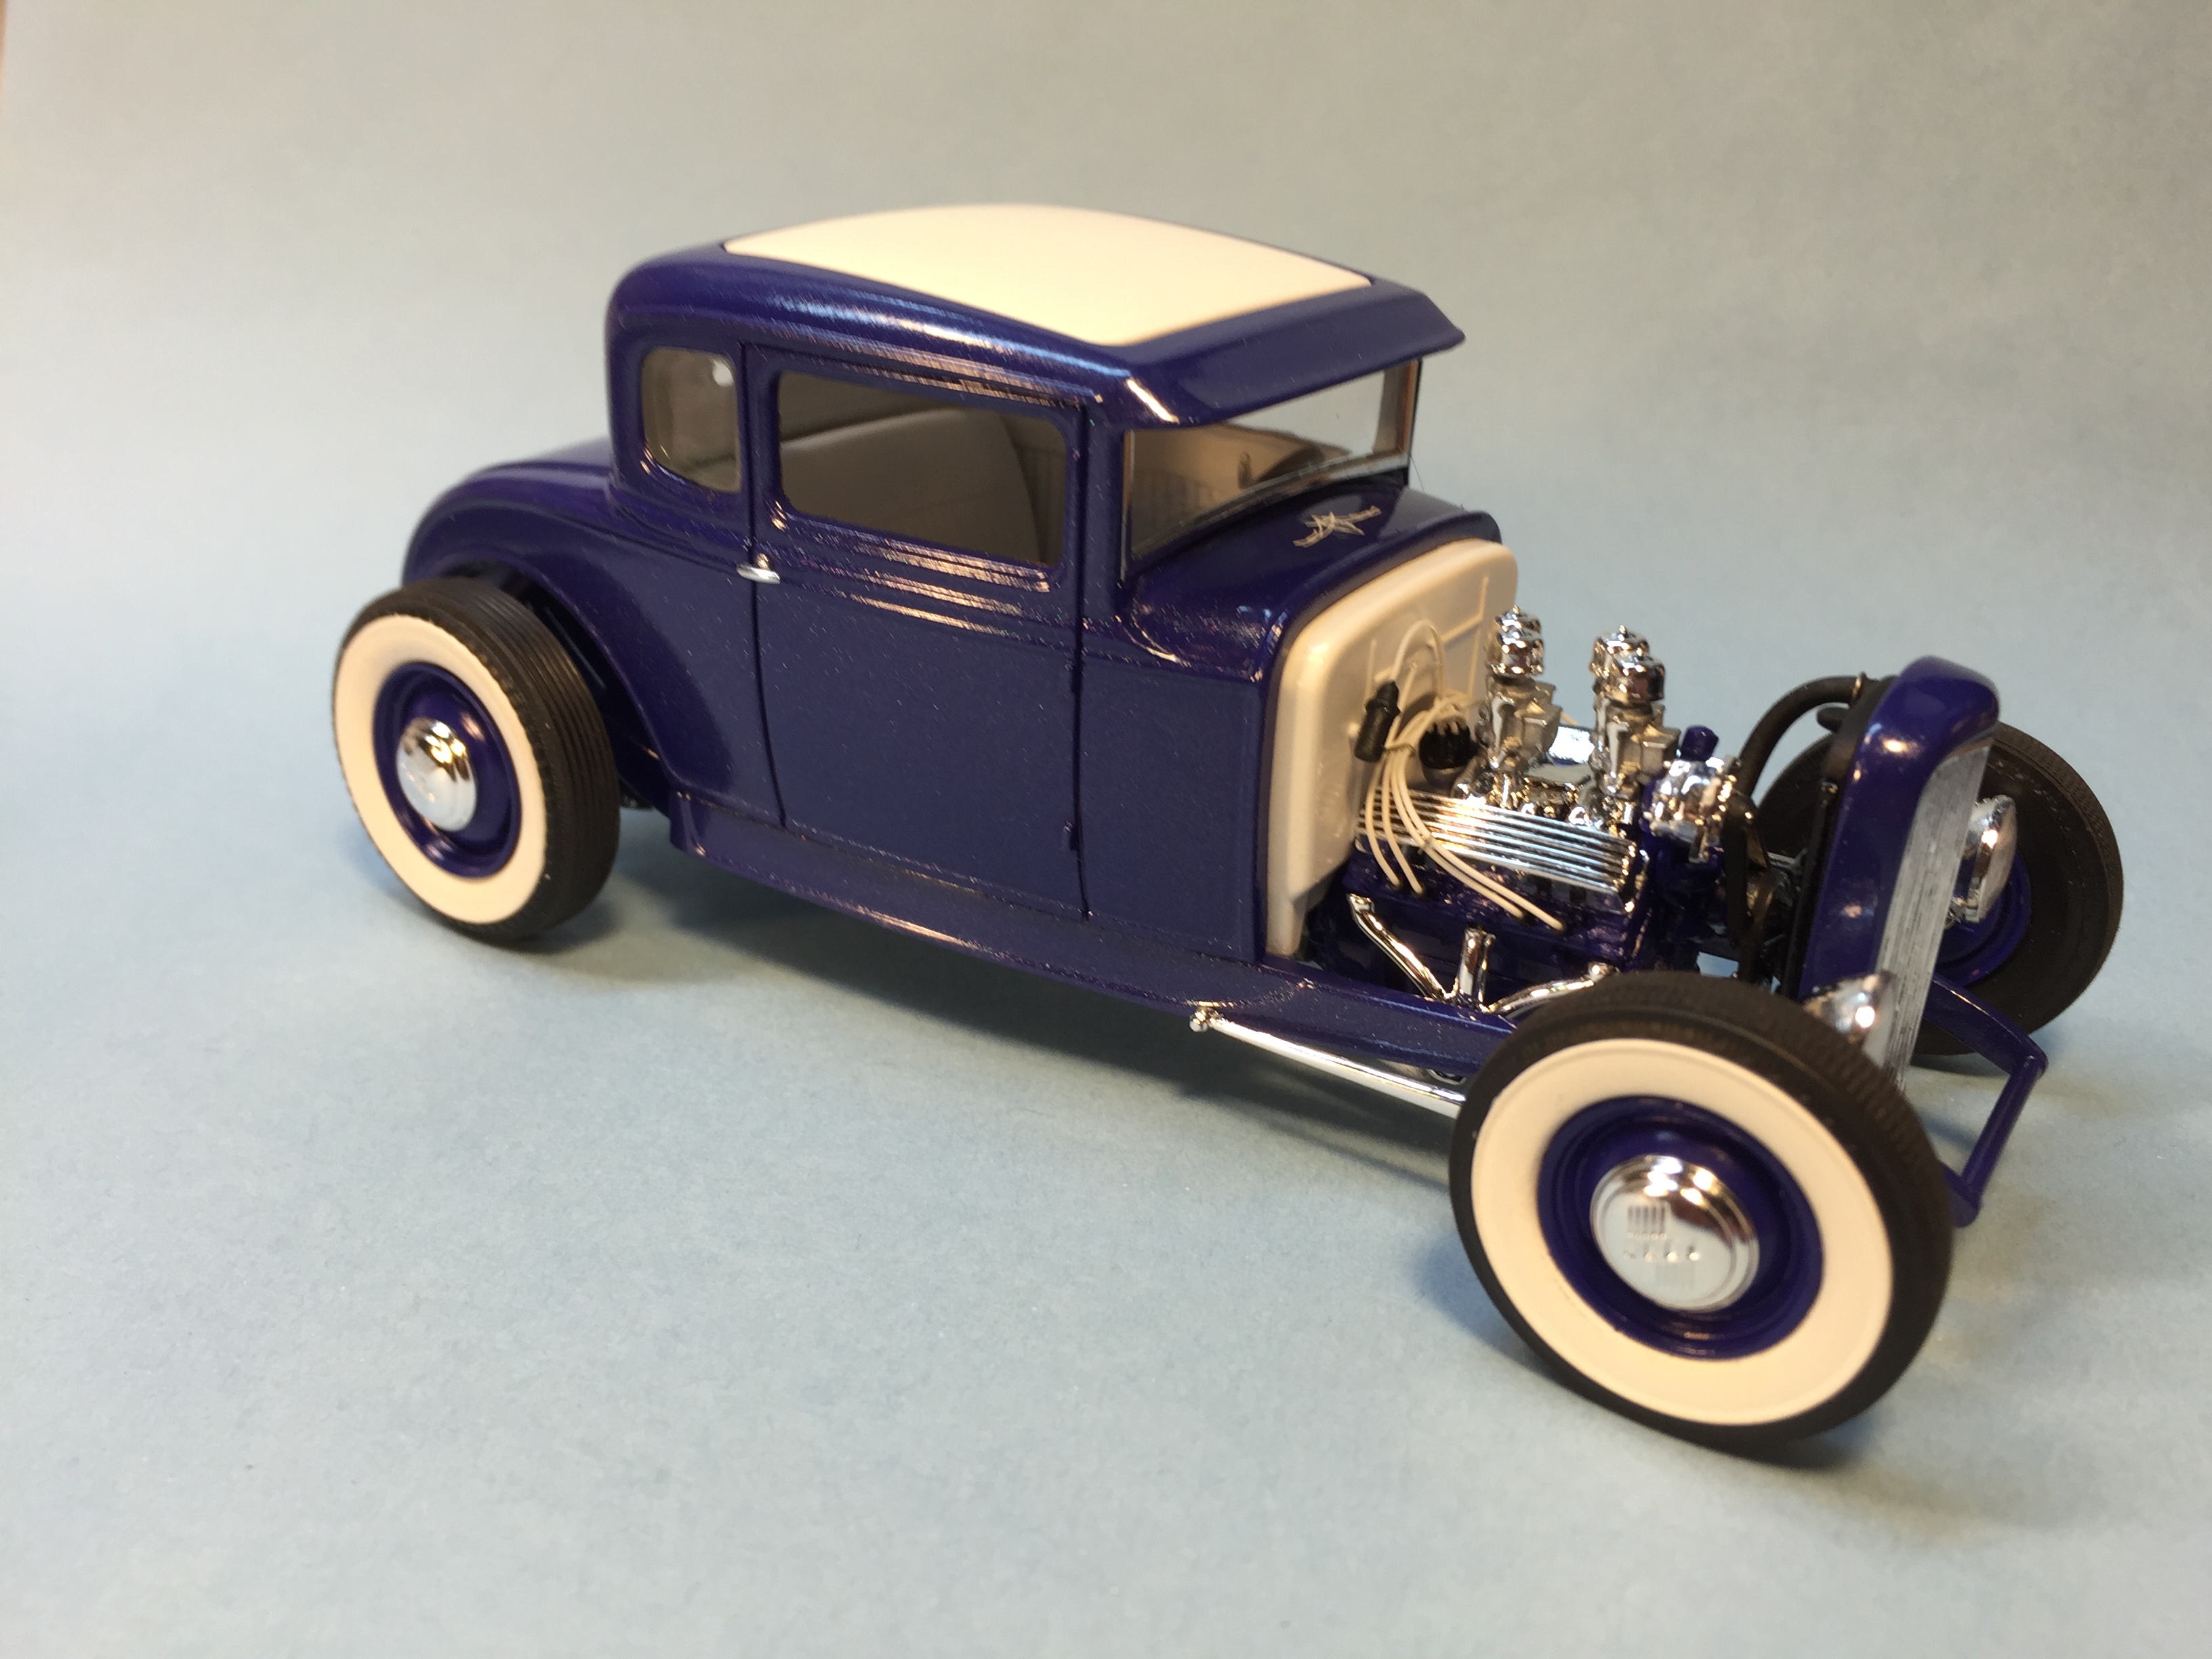 Revell '30 Model A 5ive Window Coupe.